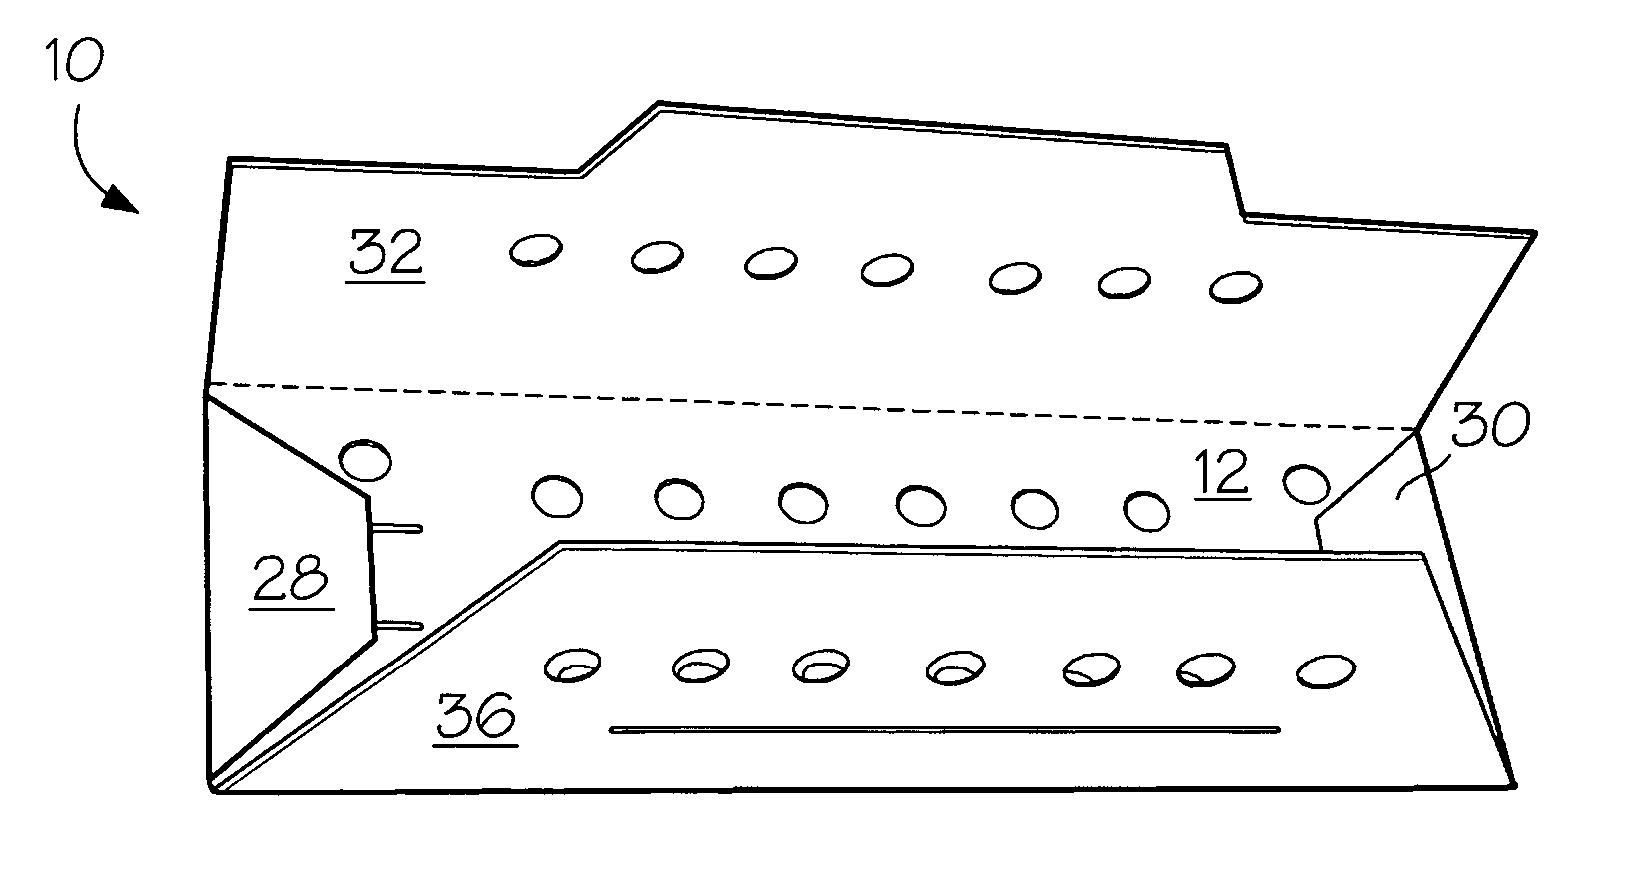 Package components for radiochemical sterilization